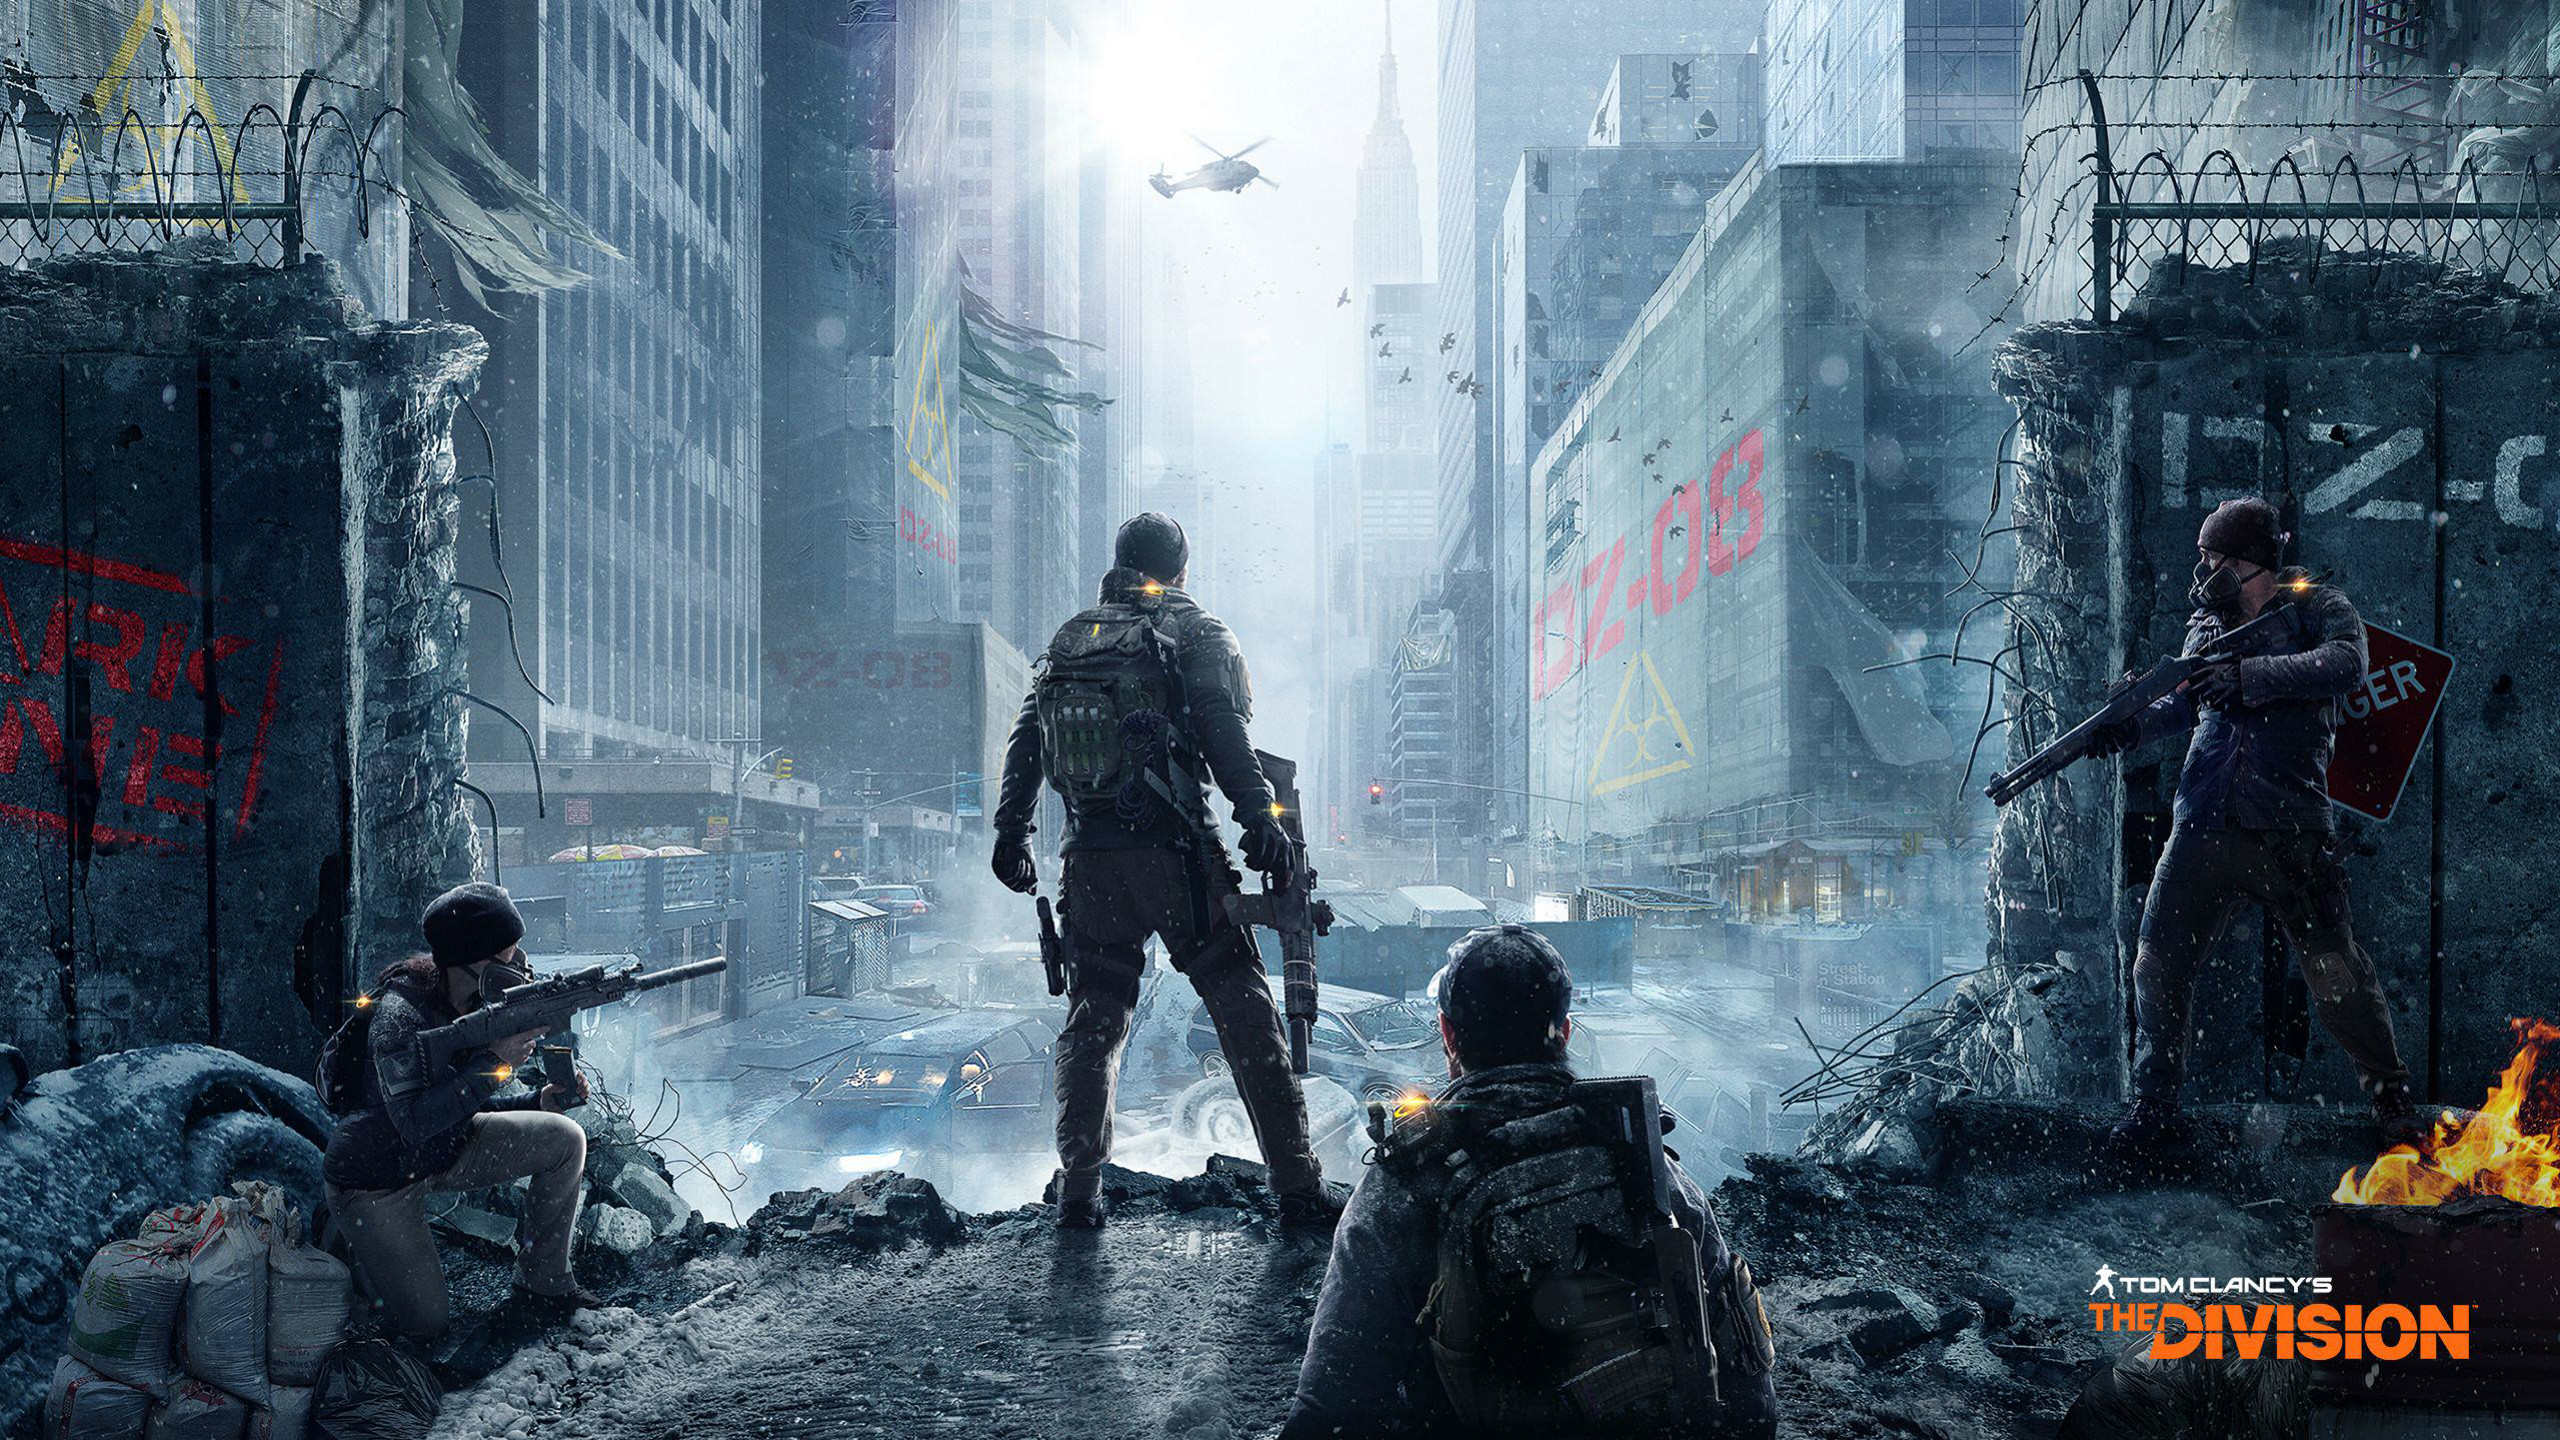 Free Download The Division Wallpaper 19x1080 87 Images 2560x1440 For Your Desktop Mobile Tablet Explore 56 The Division Hd Wallpapers The Division Wallpaper 2560x1440 The Division 4k Wallpaper The Division Mobile Wallpaper